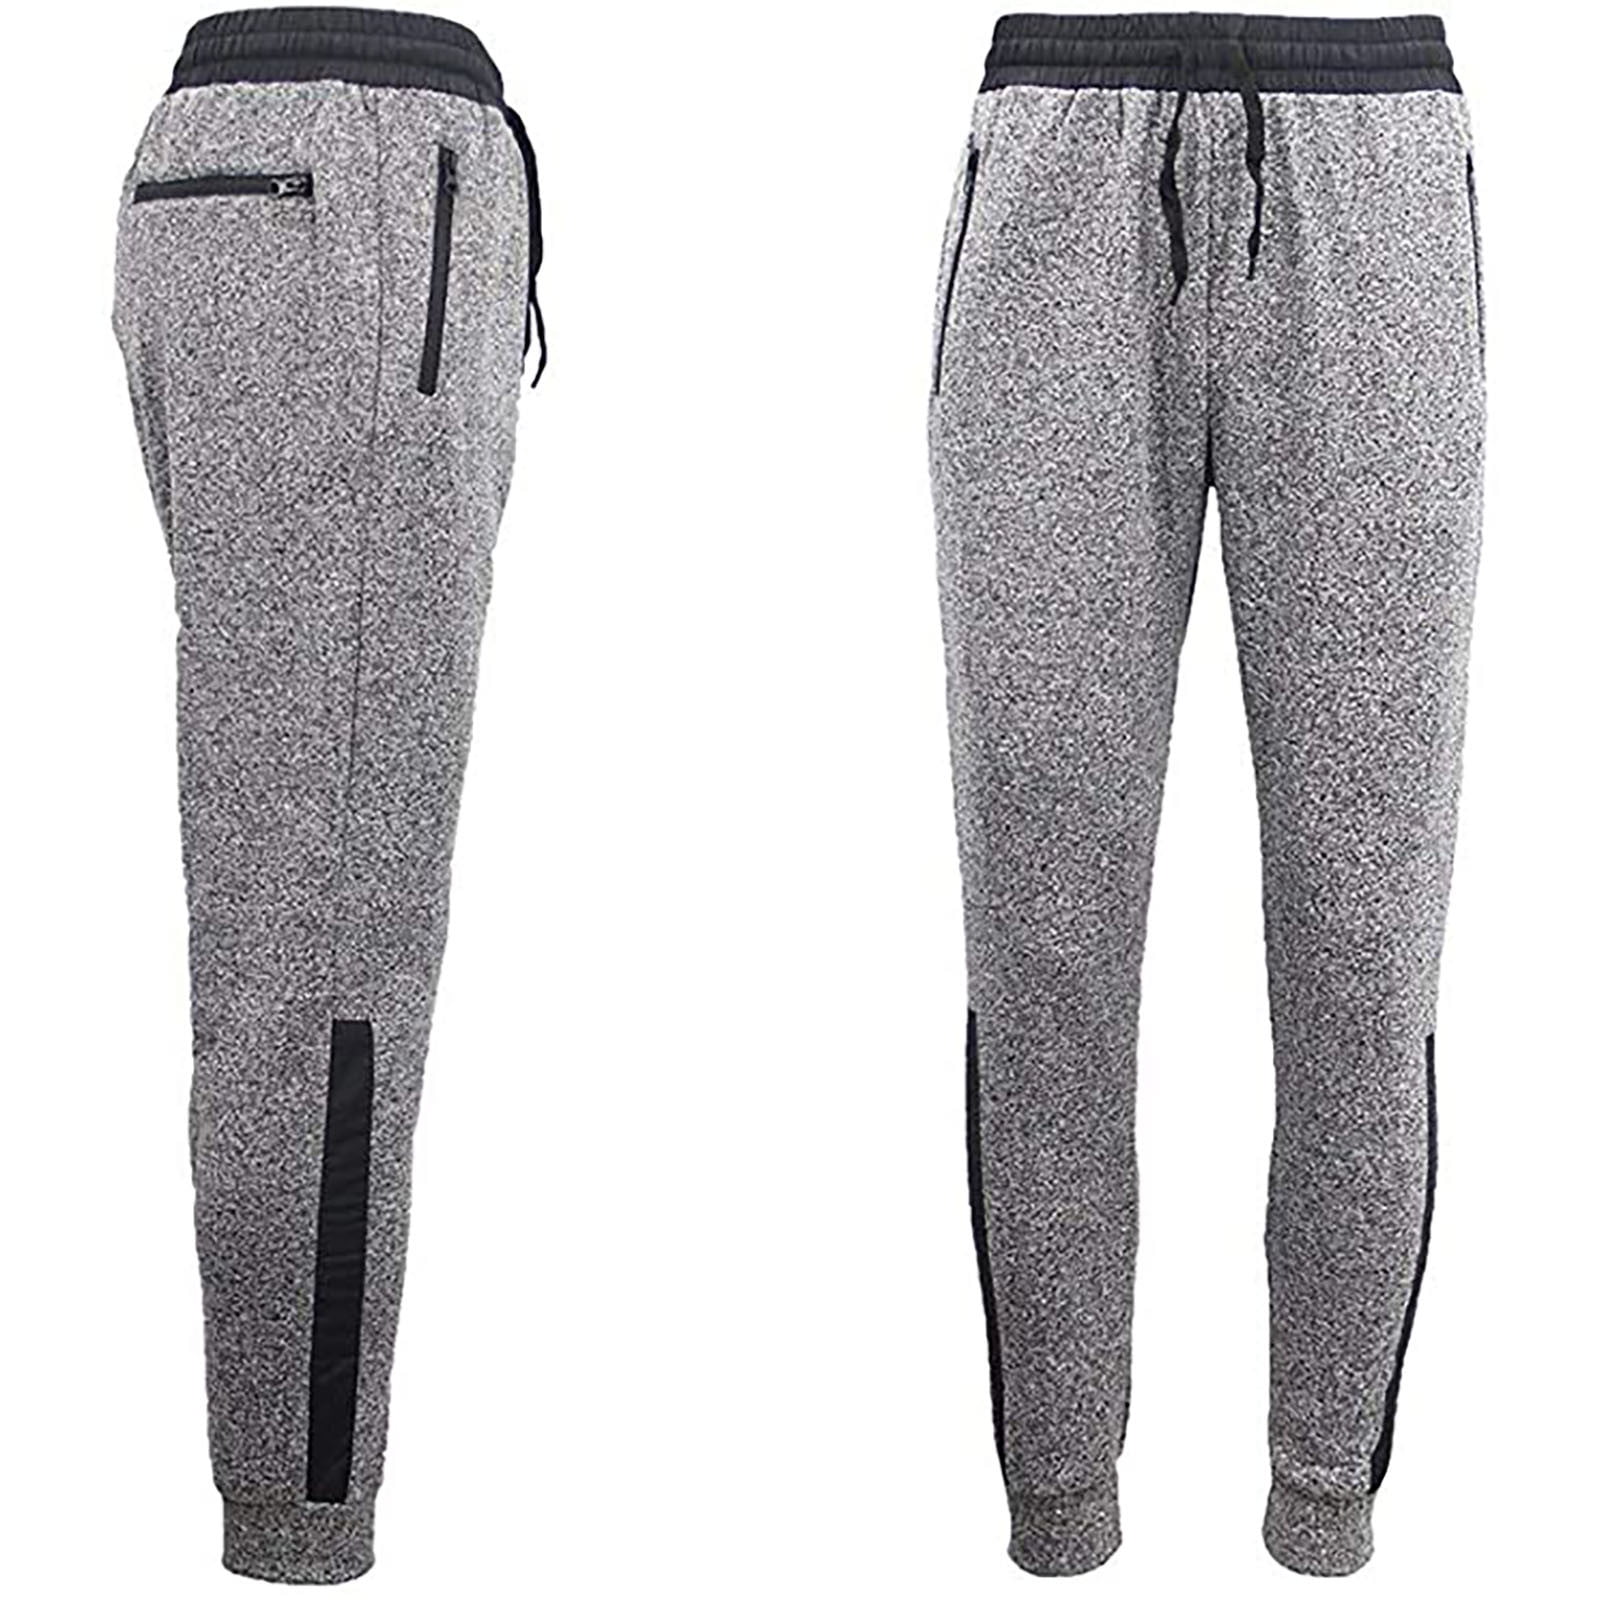 CAICJ98 Mens Joggers With Pockets Men's Active Tack Jogger Pants Fitness  Tapered Sweatpants Slim Fit Trousers with Zipper Pockets Grey,XXL 